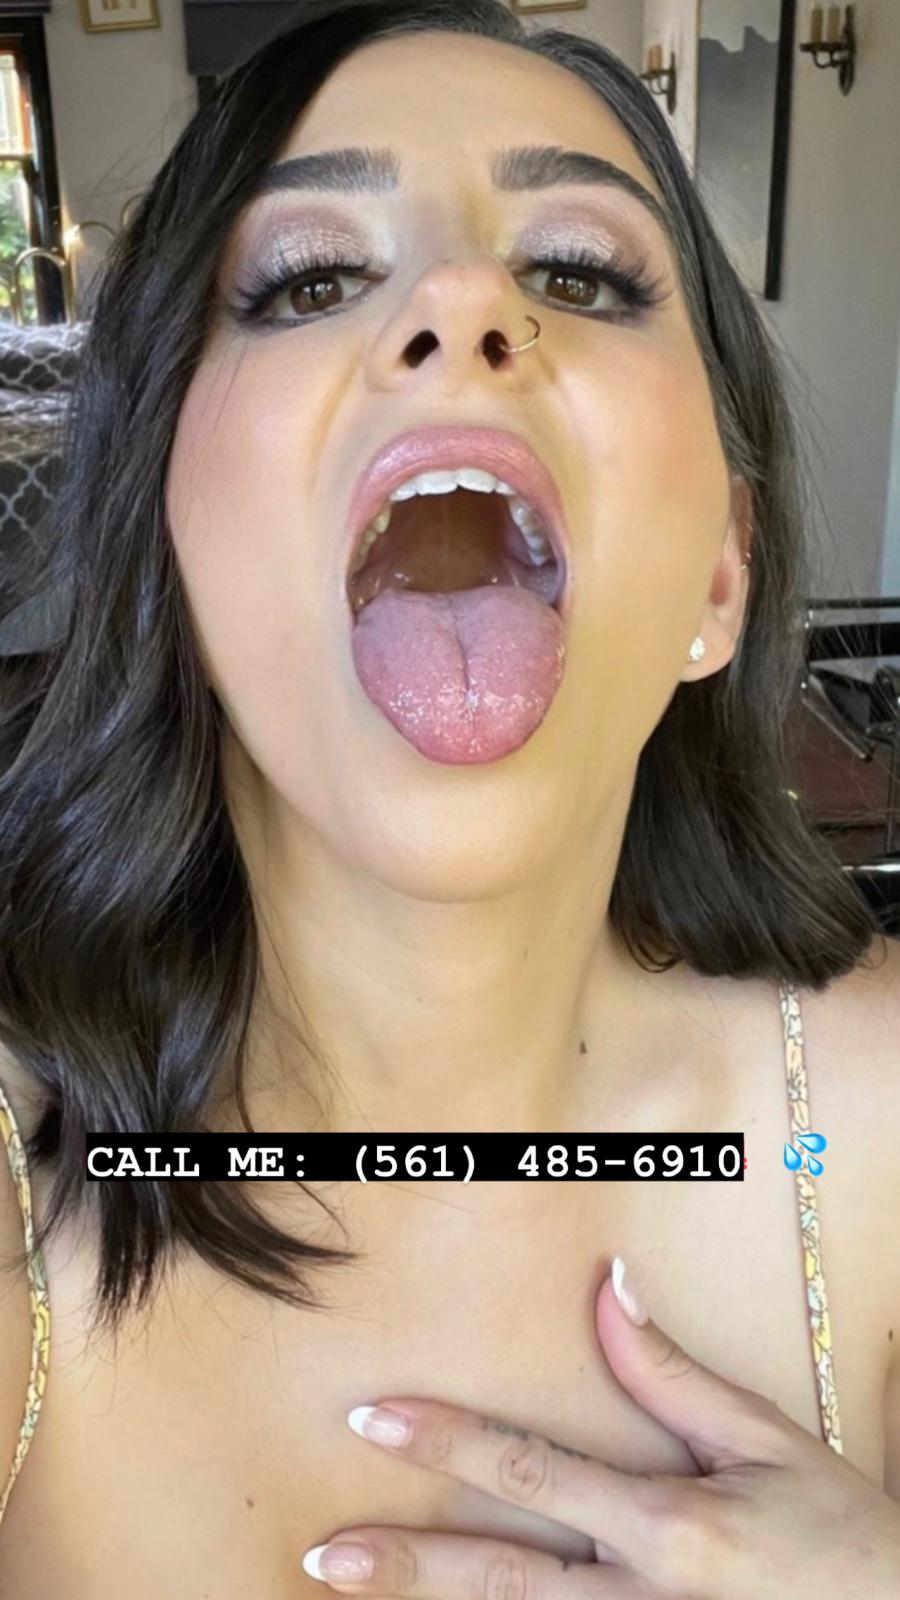 PAY CASH 100% 🍡REAL 100%🍑CALL ME FOR FU’CK📞(561) 485-6910 AVALIABLE TONIGHT